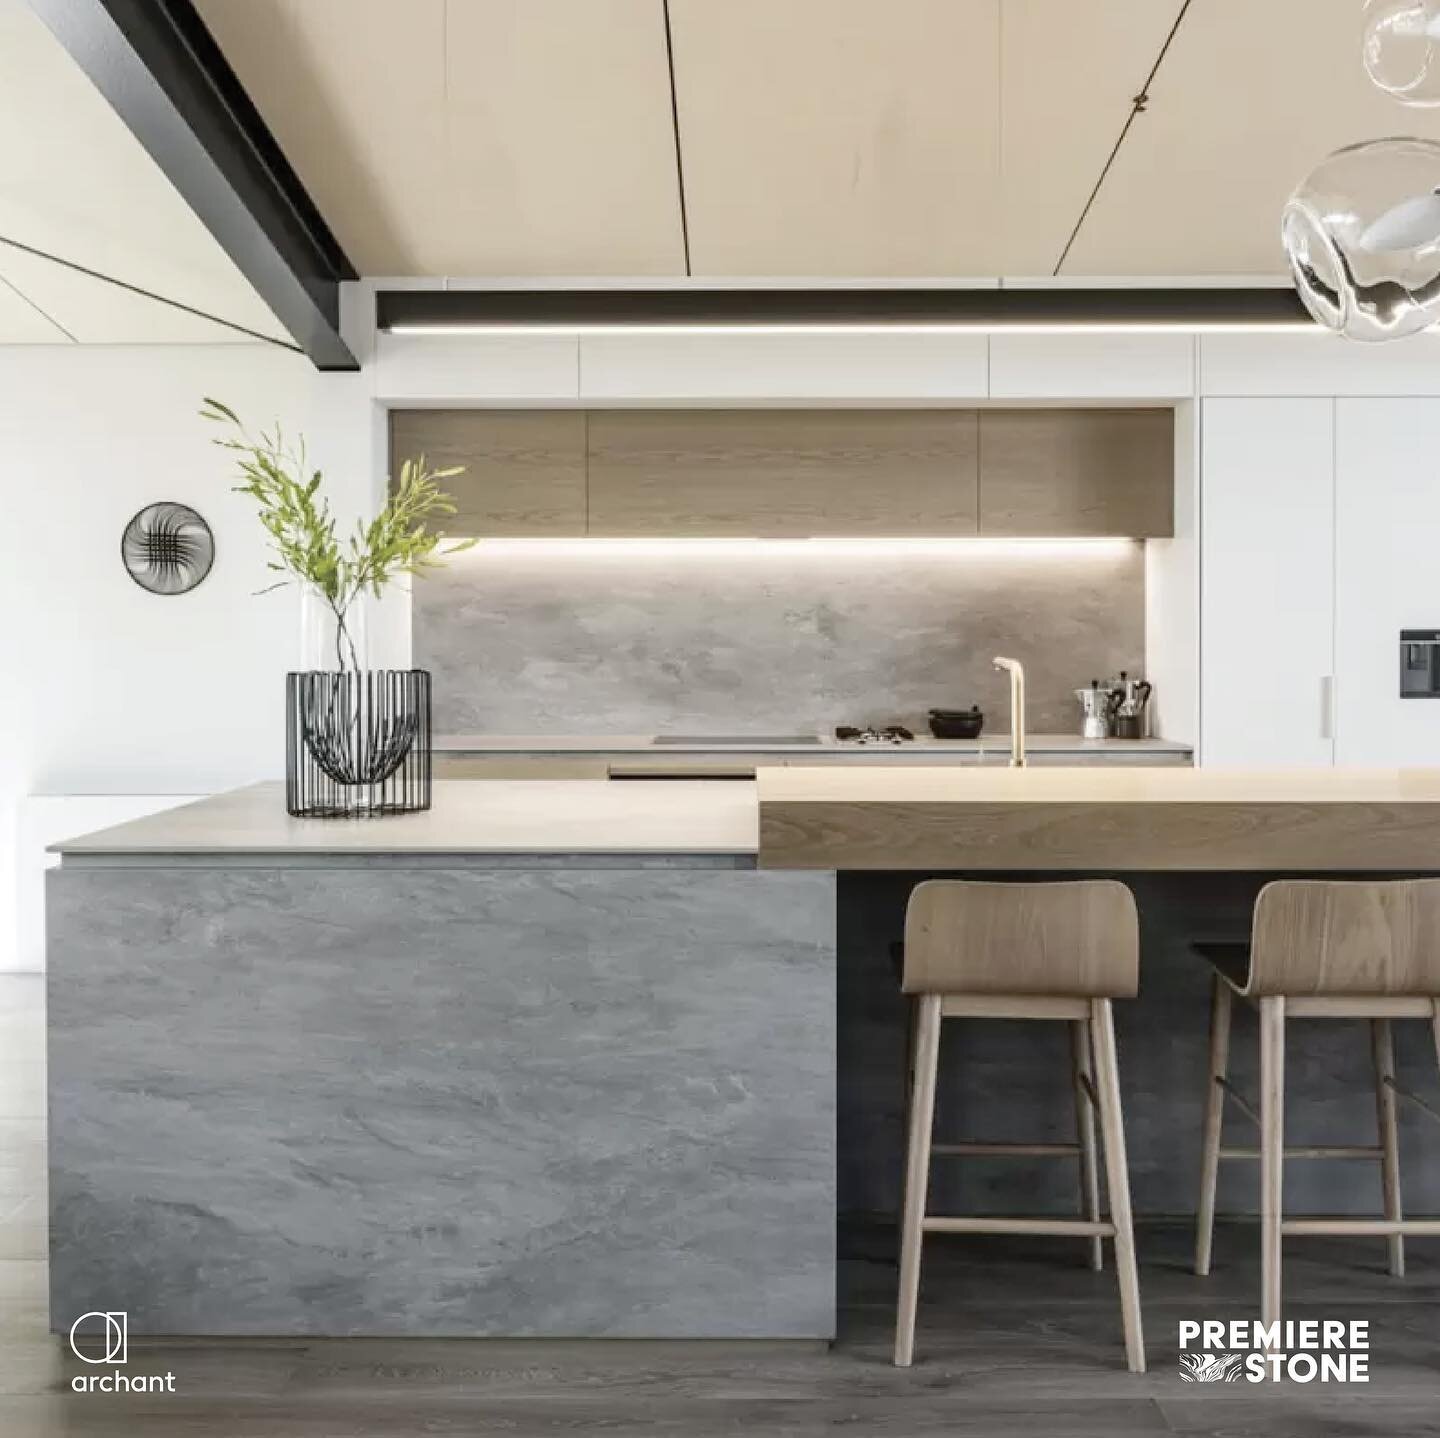 Archant&rsquo;s Stone Gris porcelain surface takes center stage in this stunning kitchen design.

Visit us at premierestone.co.nz for information about Archant surfaces and application ideas.

Design: Davinia Sutton 
Photography: Stephen Goodenough

